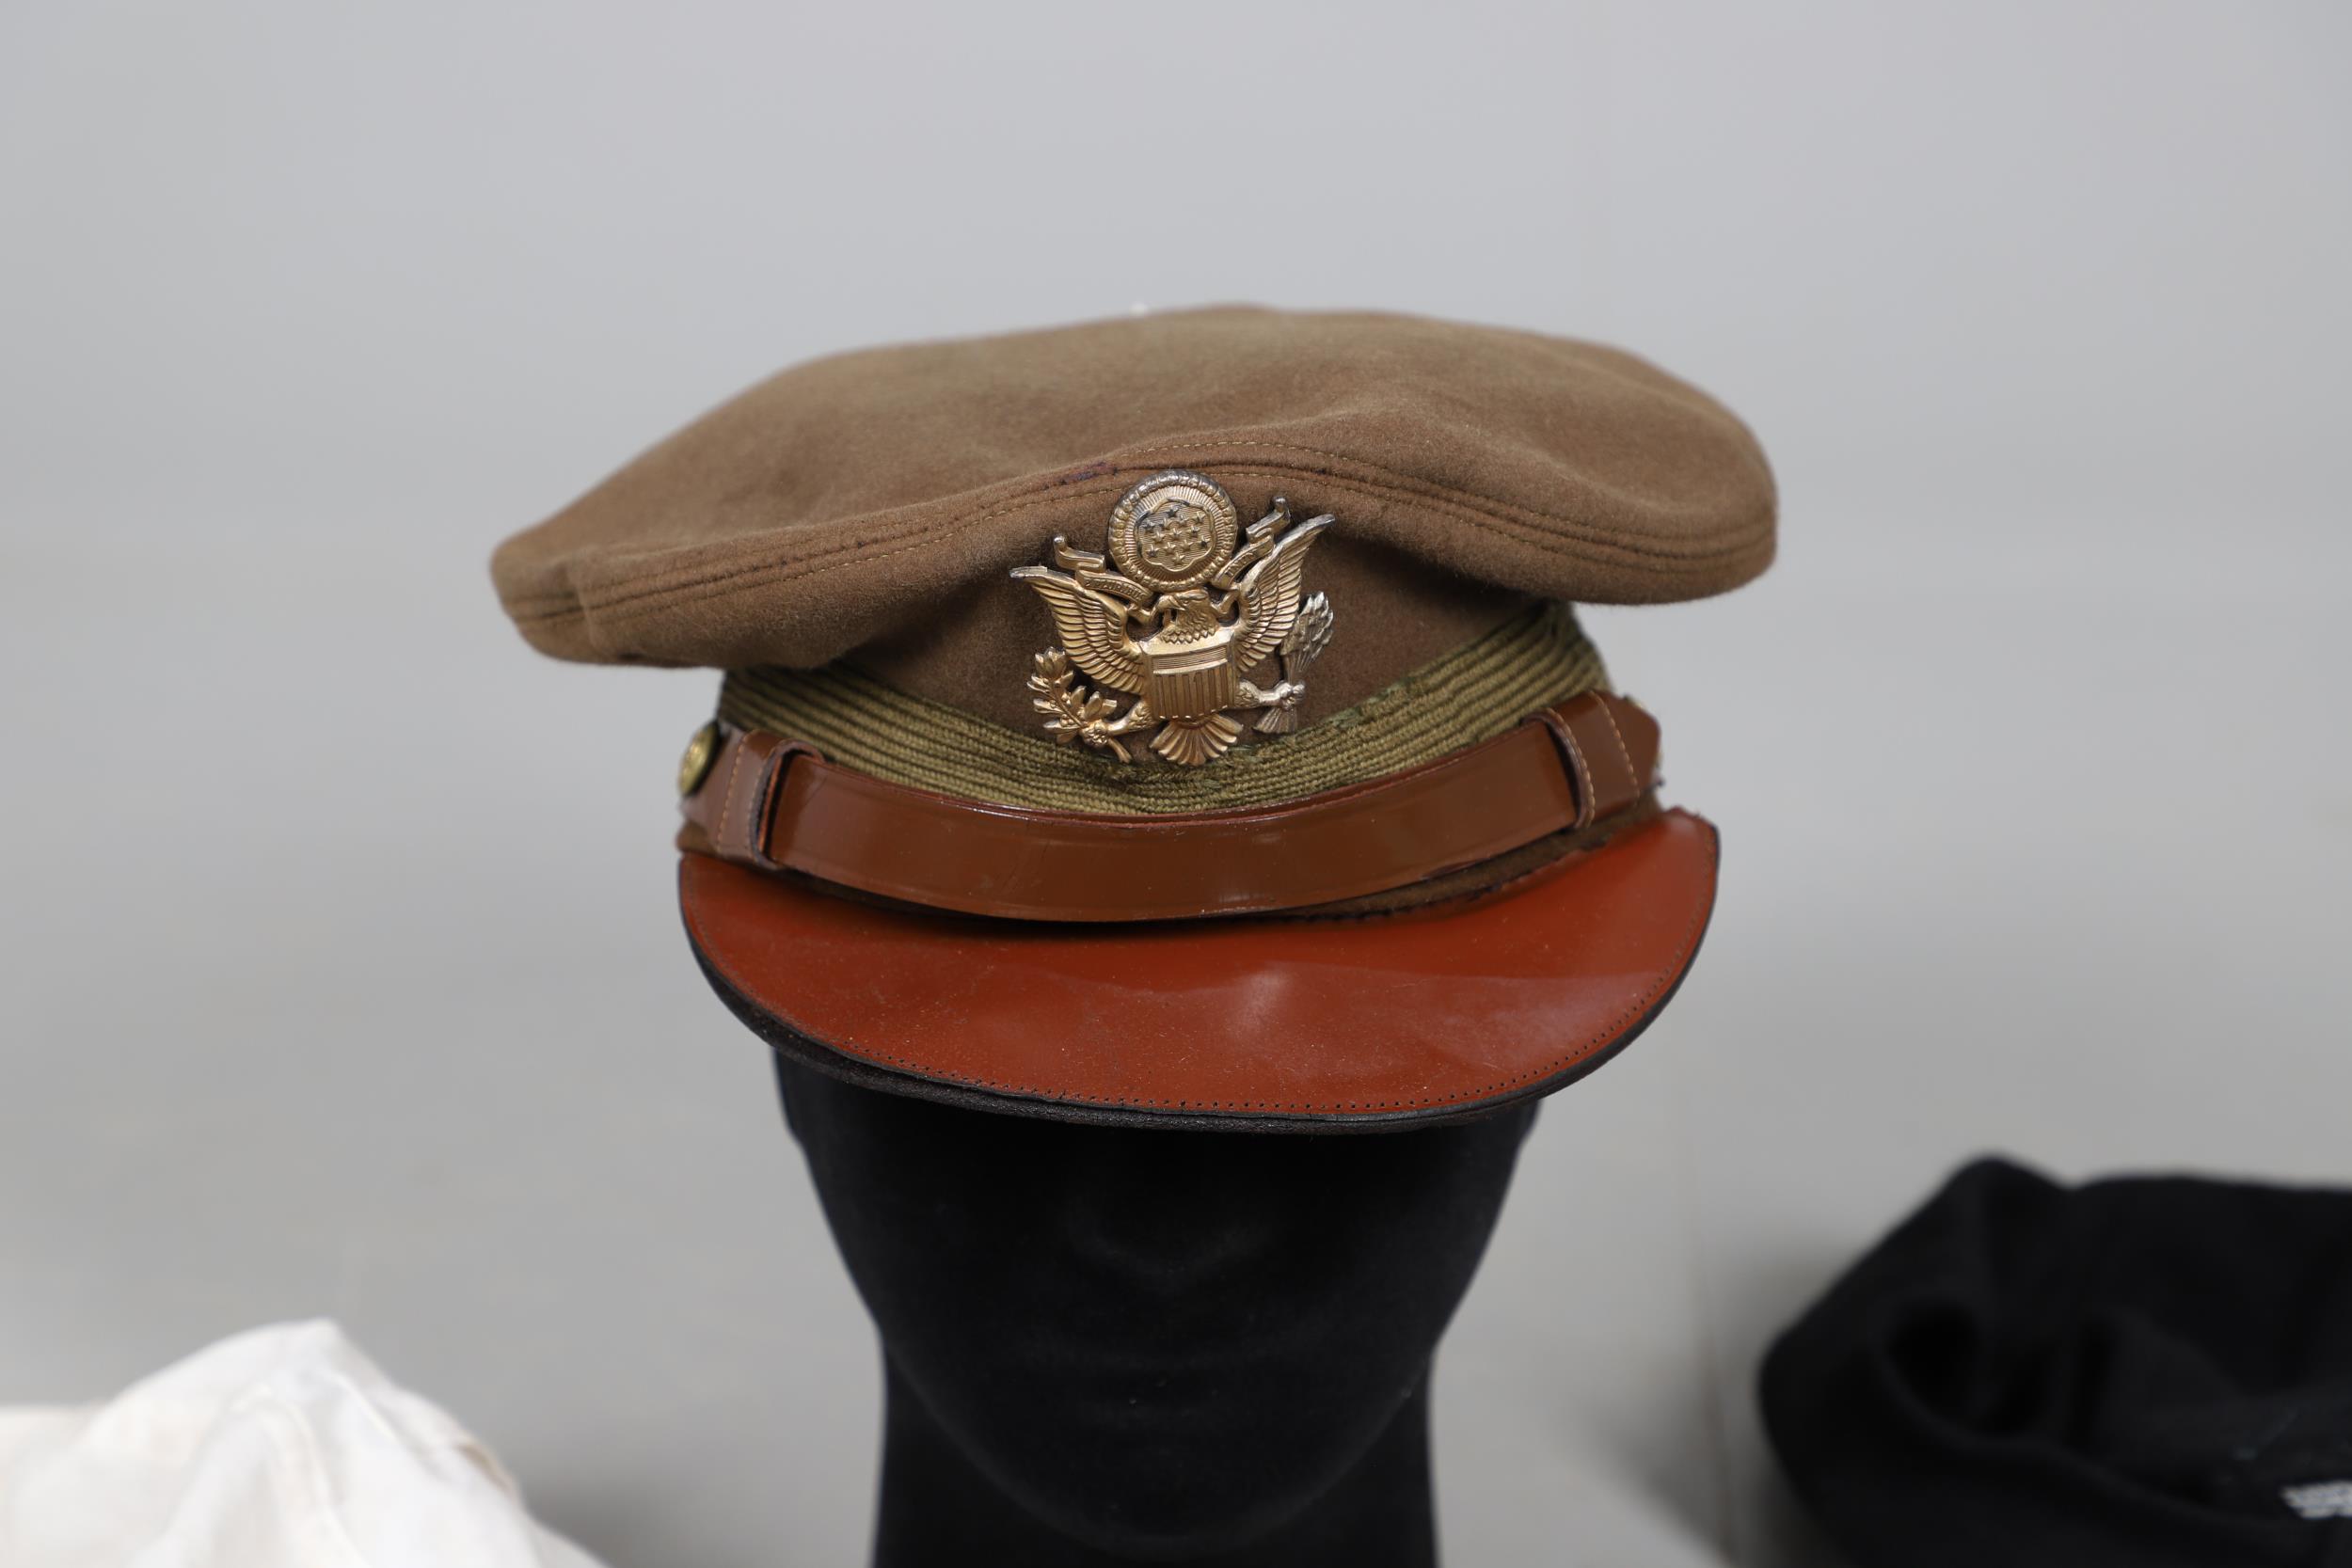 AN EXTENSIVE COLLECTION OF MILITARY UNIFORM CAPS, BERETS AND OTHER ITEMS. SECOND WORLD WAR AND LATER - Image 2 of 17